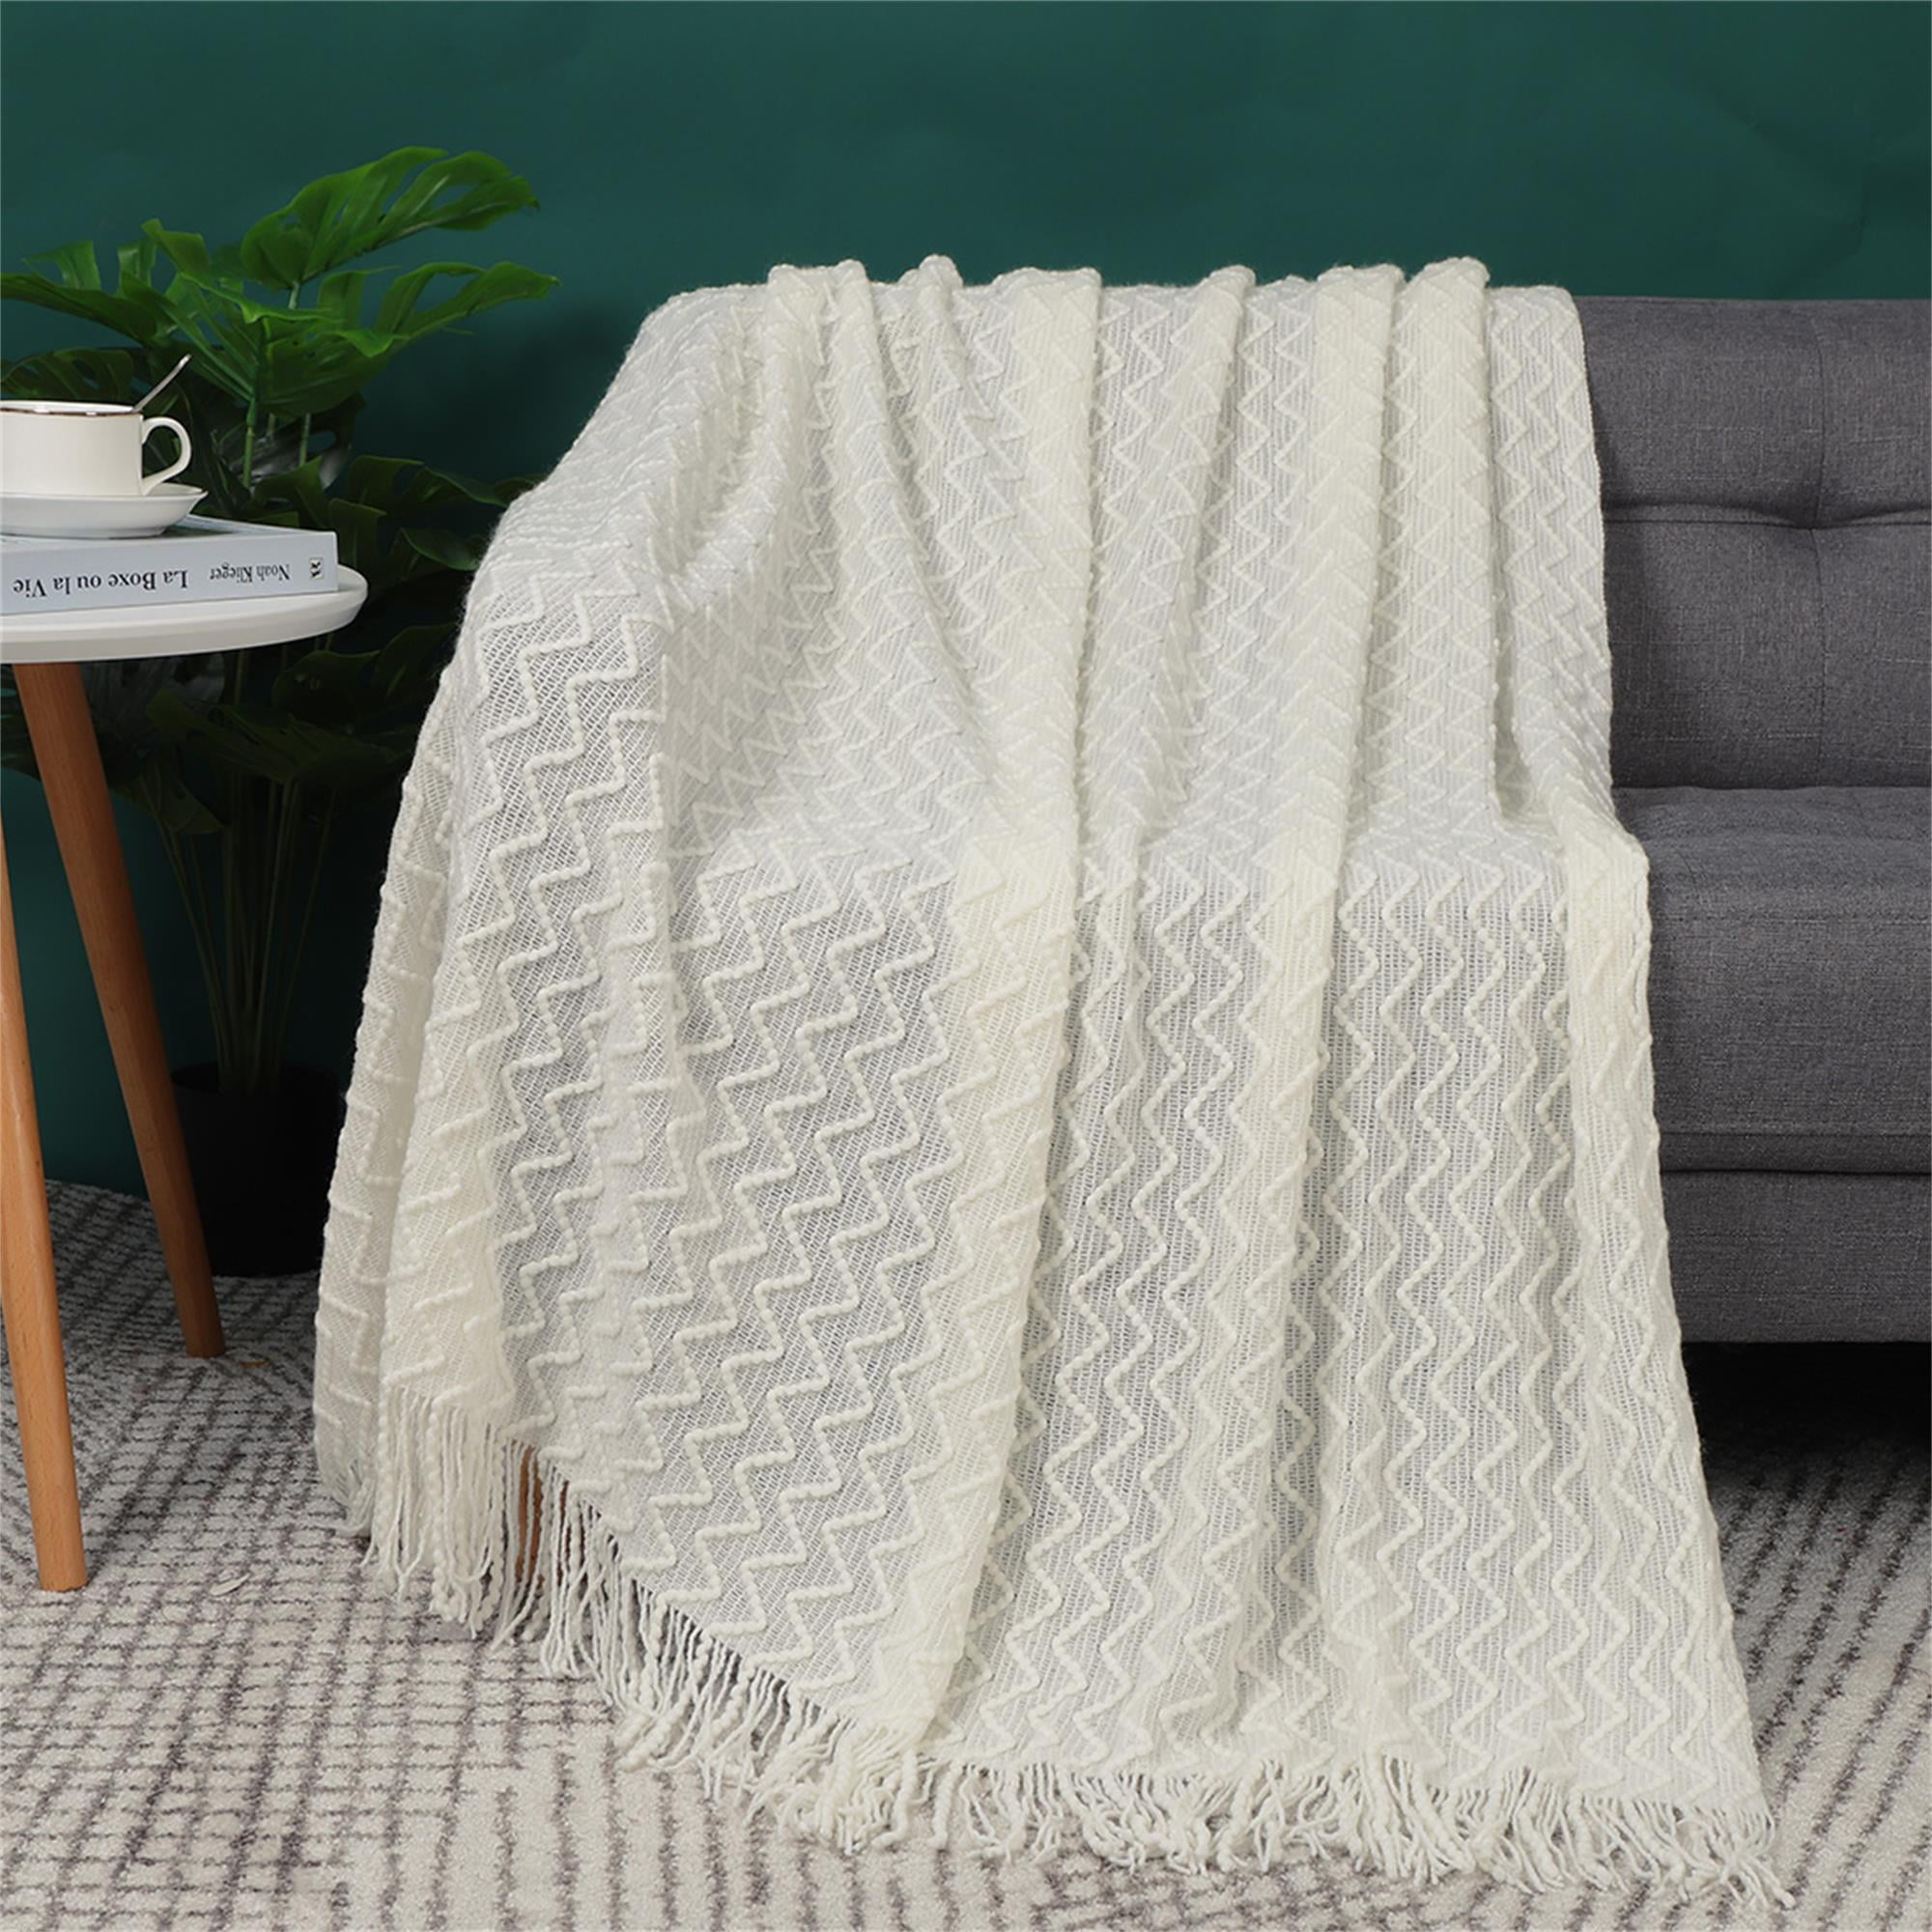 PiccoCasa 100% Acrylic Knit Throw Blanket Wave Pattern Soft Lightweight Decors Knitted Blanket with Tassels Fringe for Couch Sofa 50x60 Inch Ginger Bed Travel